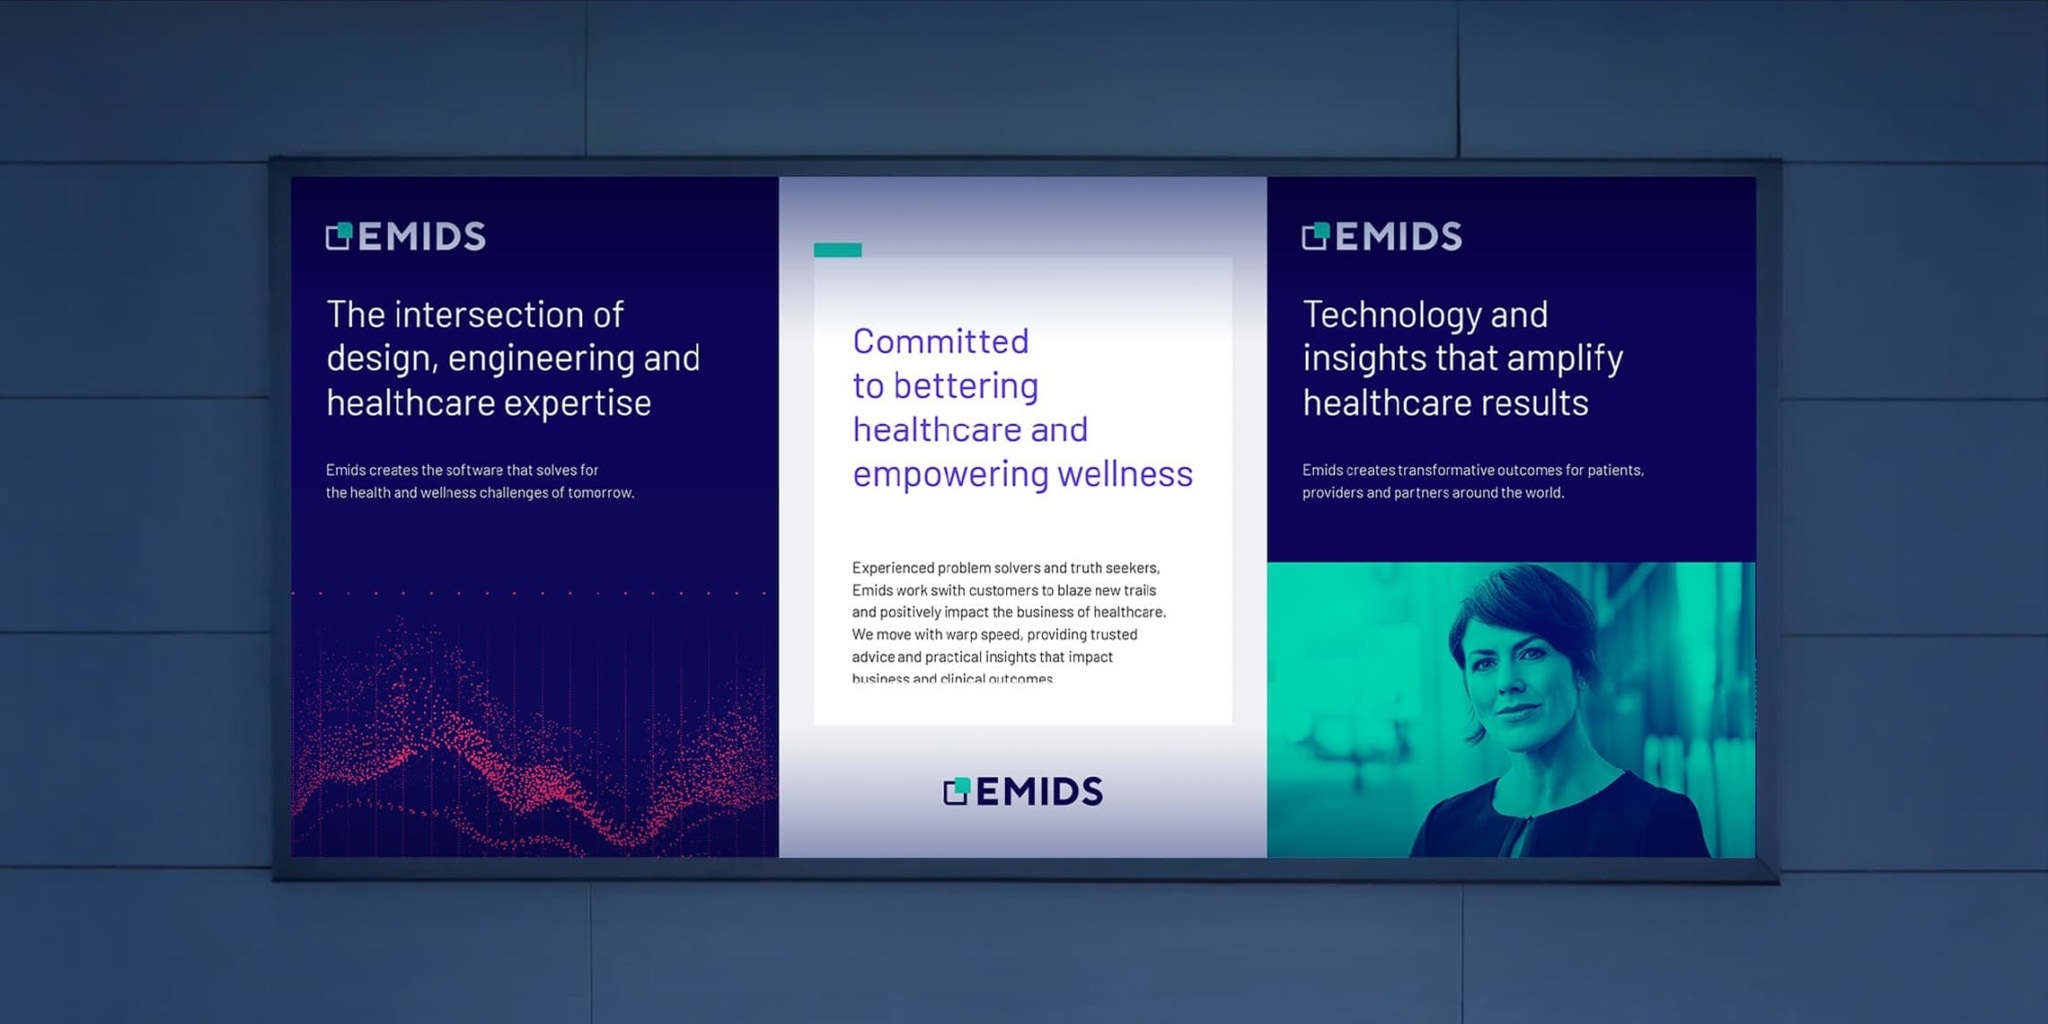 Out-of-home ads designed for Emids brand